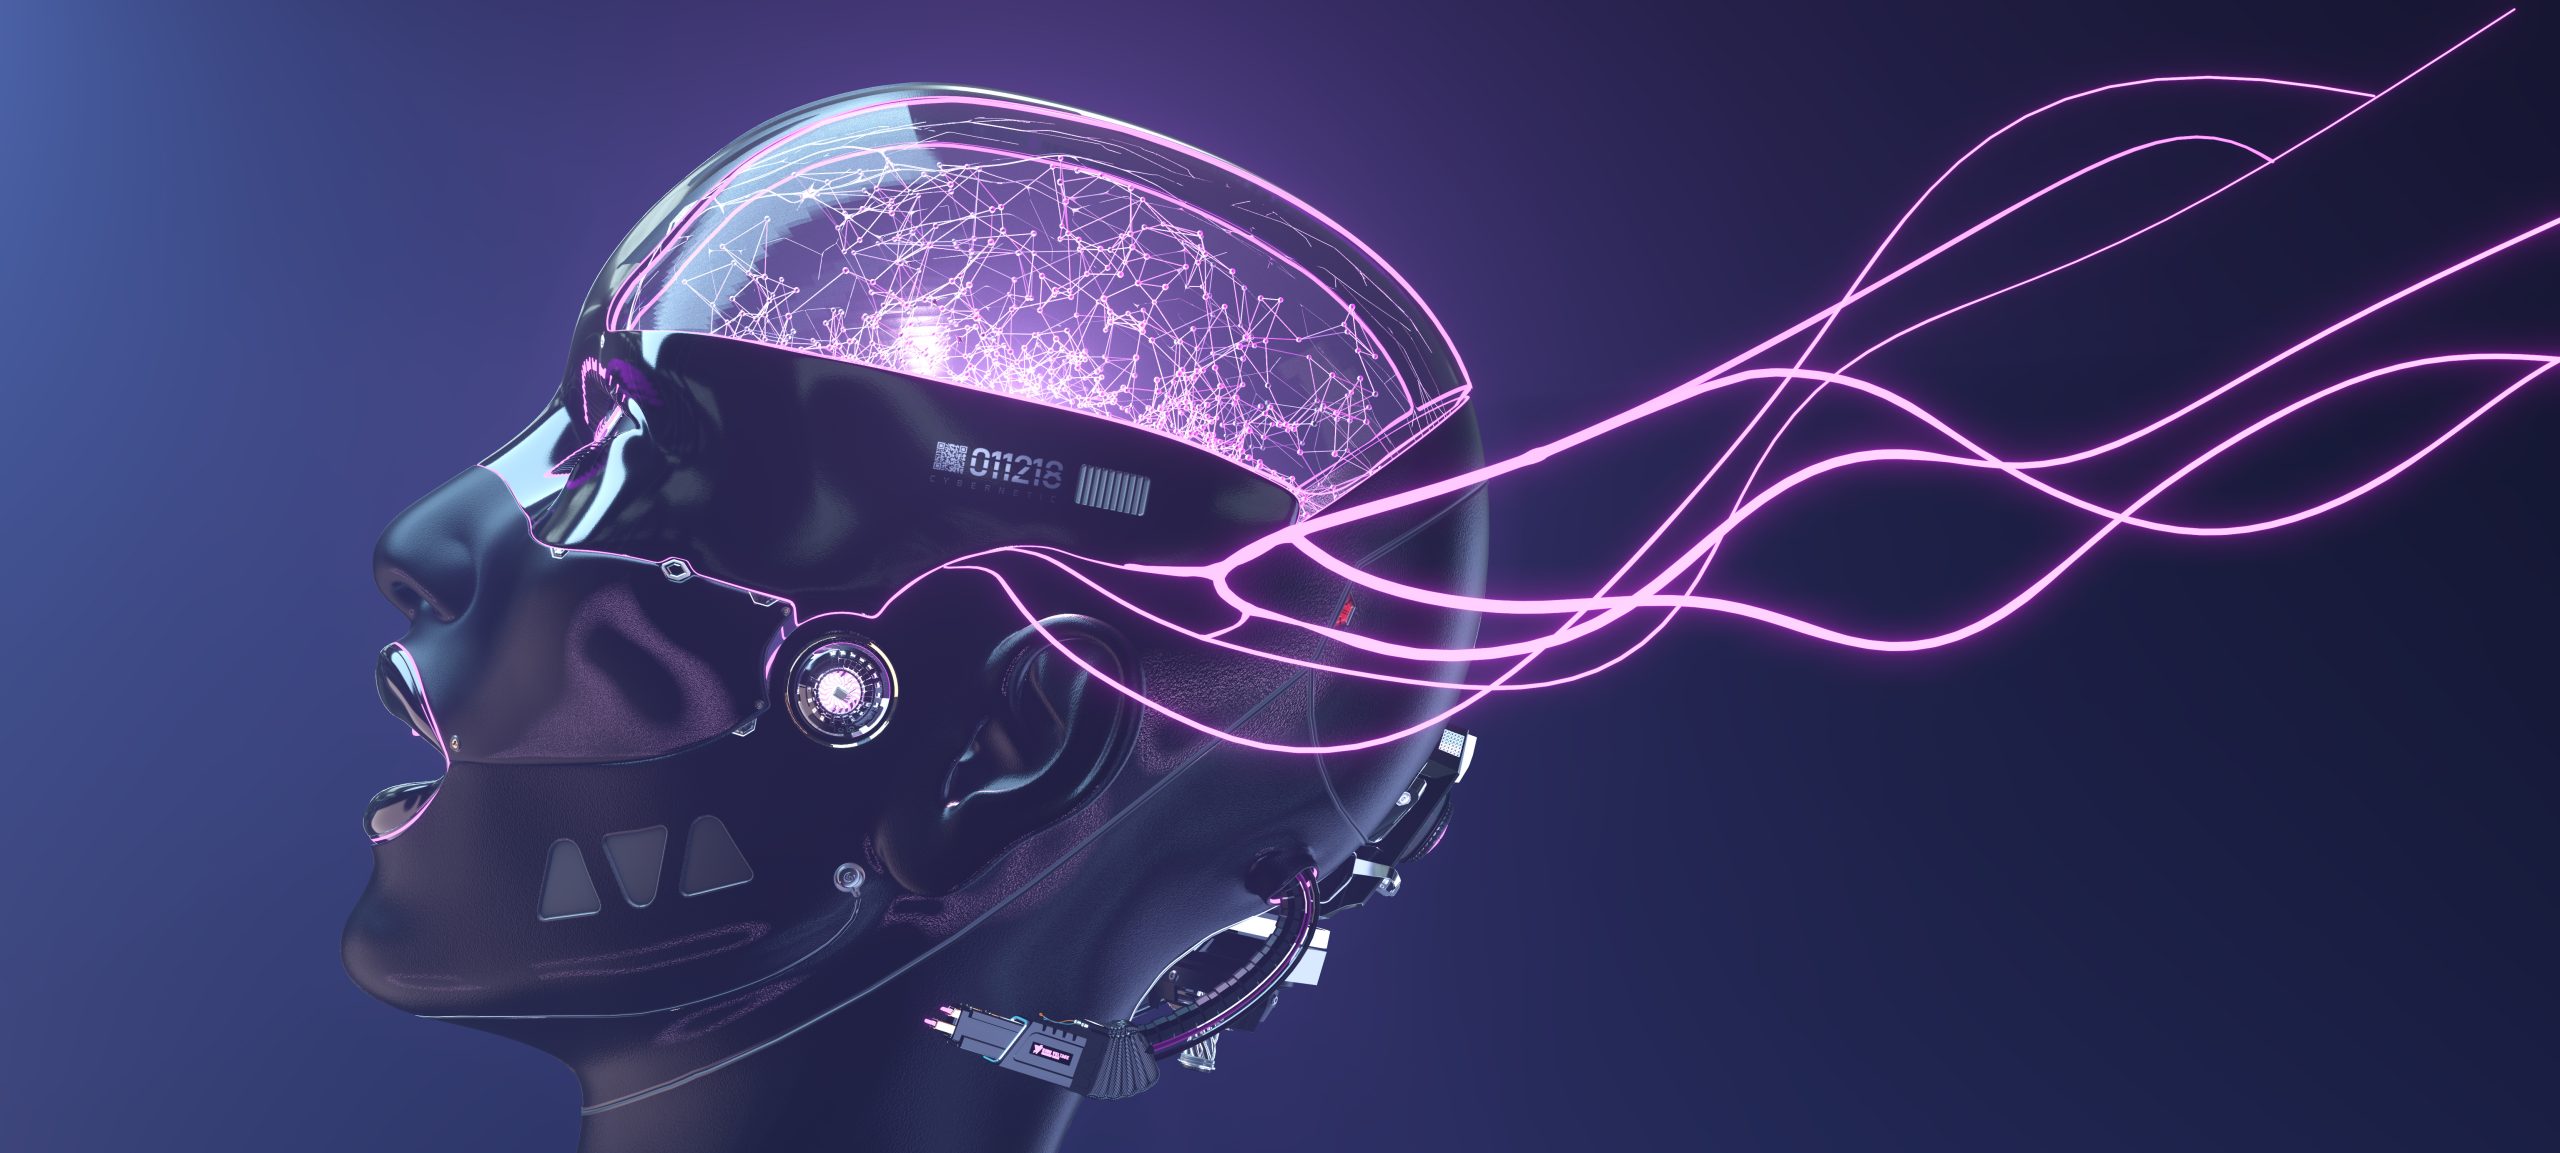 Here Come the Cyborgs: Mating AI with Human Brain Cells